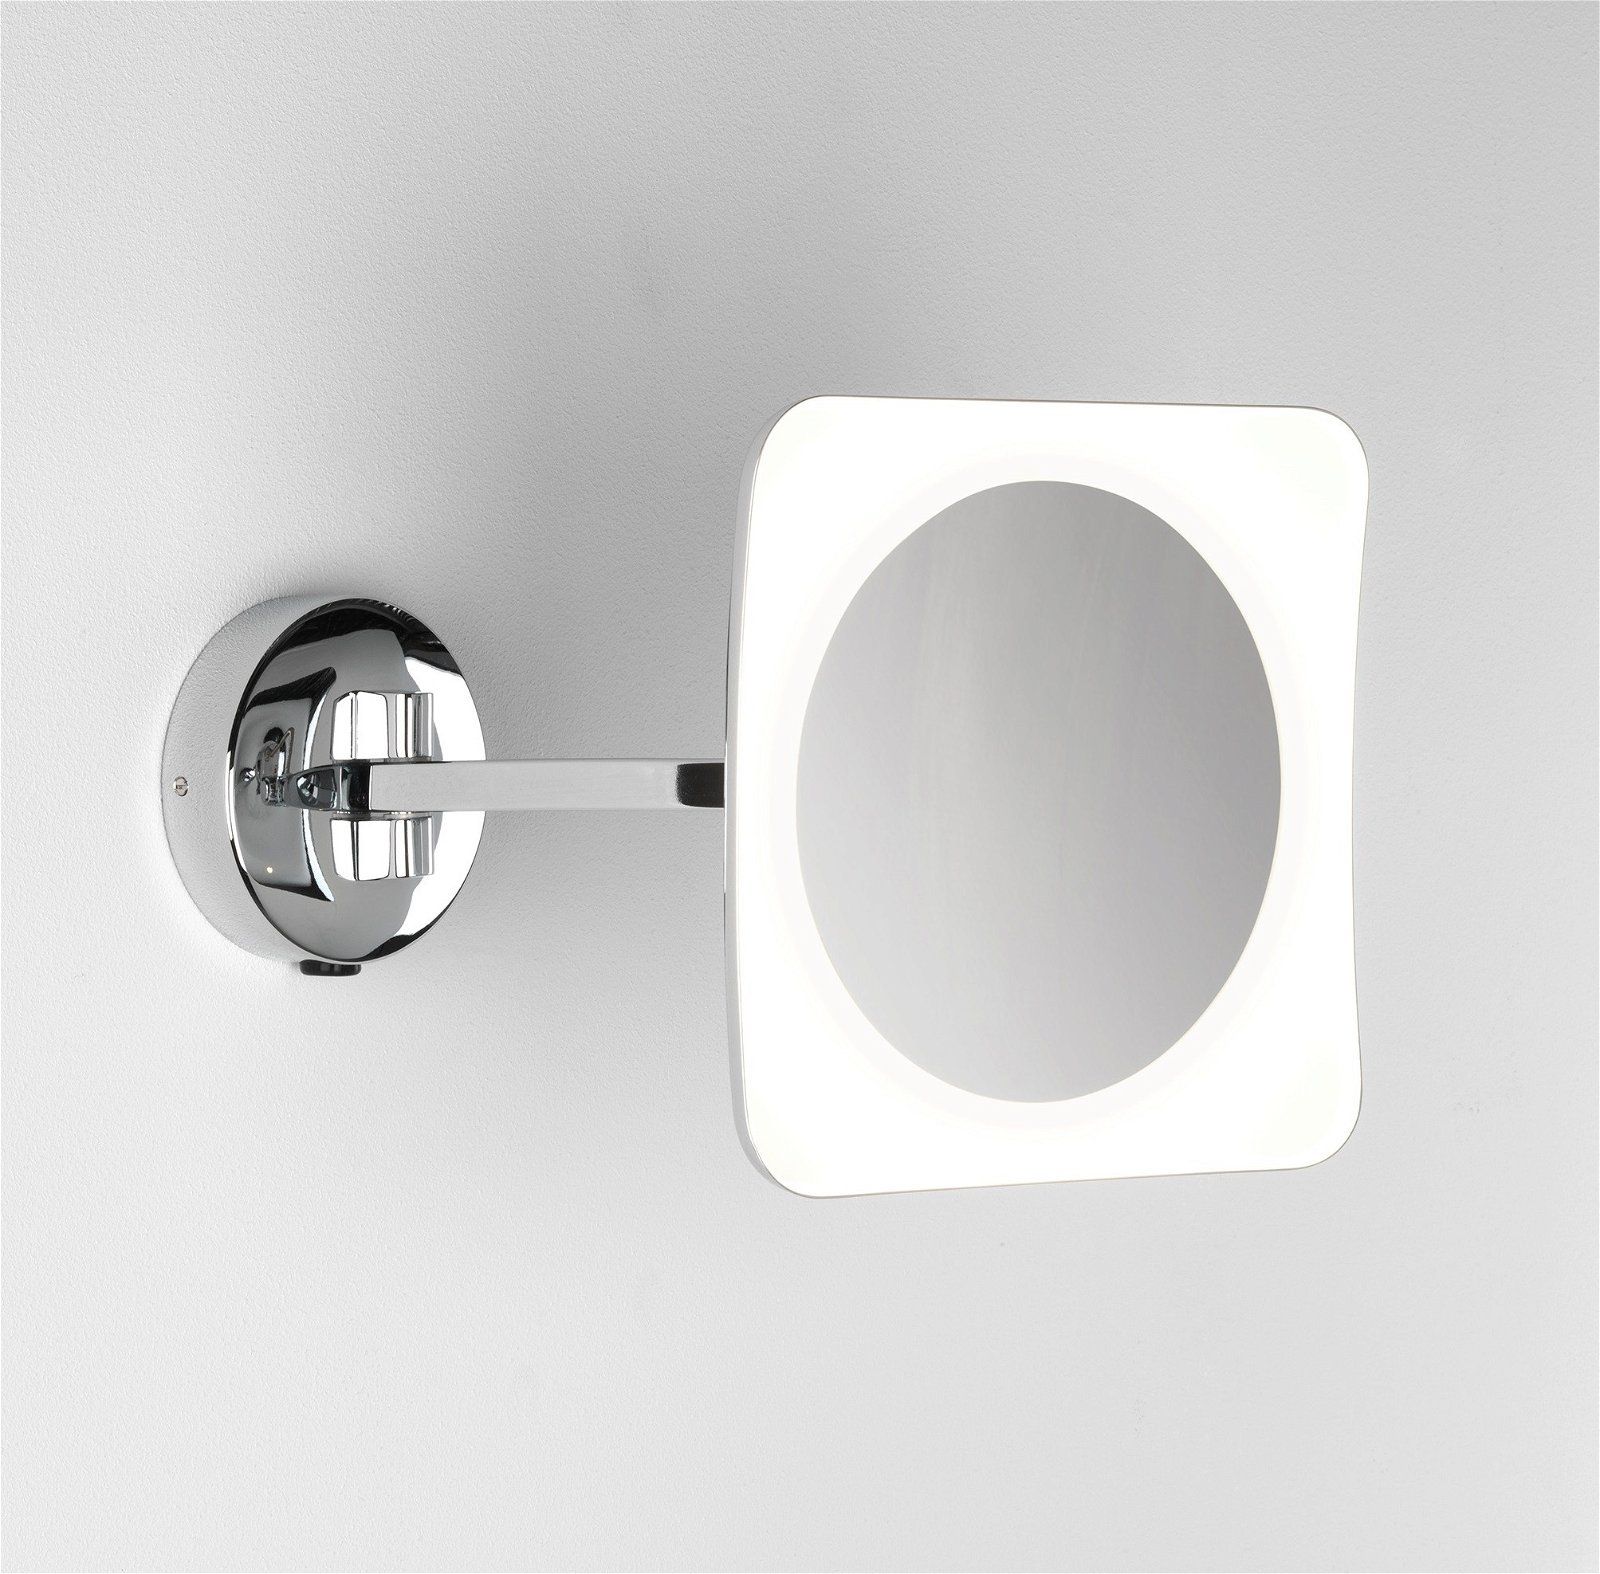 Astro Lighting – Mascali Square Led 1373003 (7968) – Ip44 Polished Pertaining To Polished Chrome Tilt Wall Mirrors (View 10 of 15)